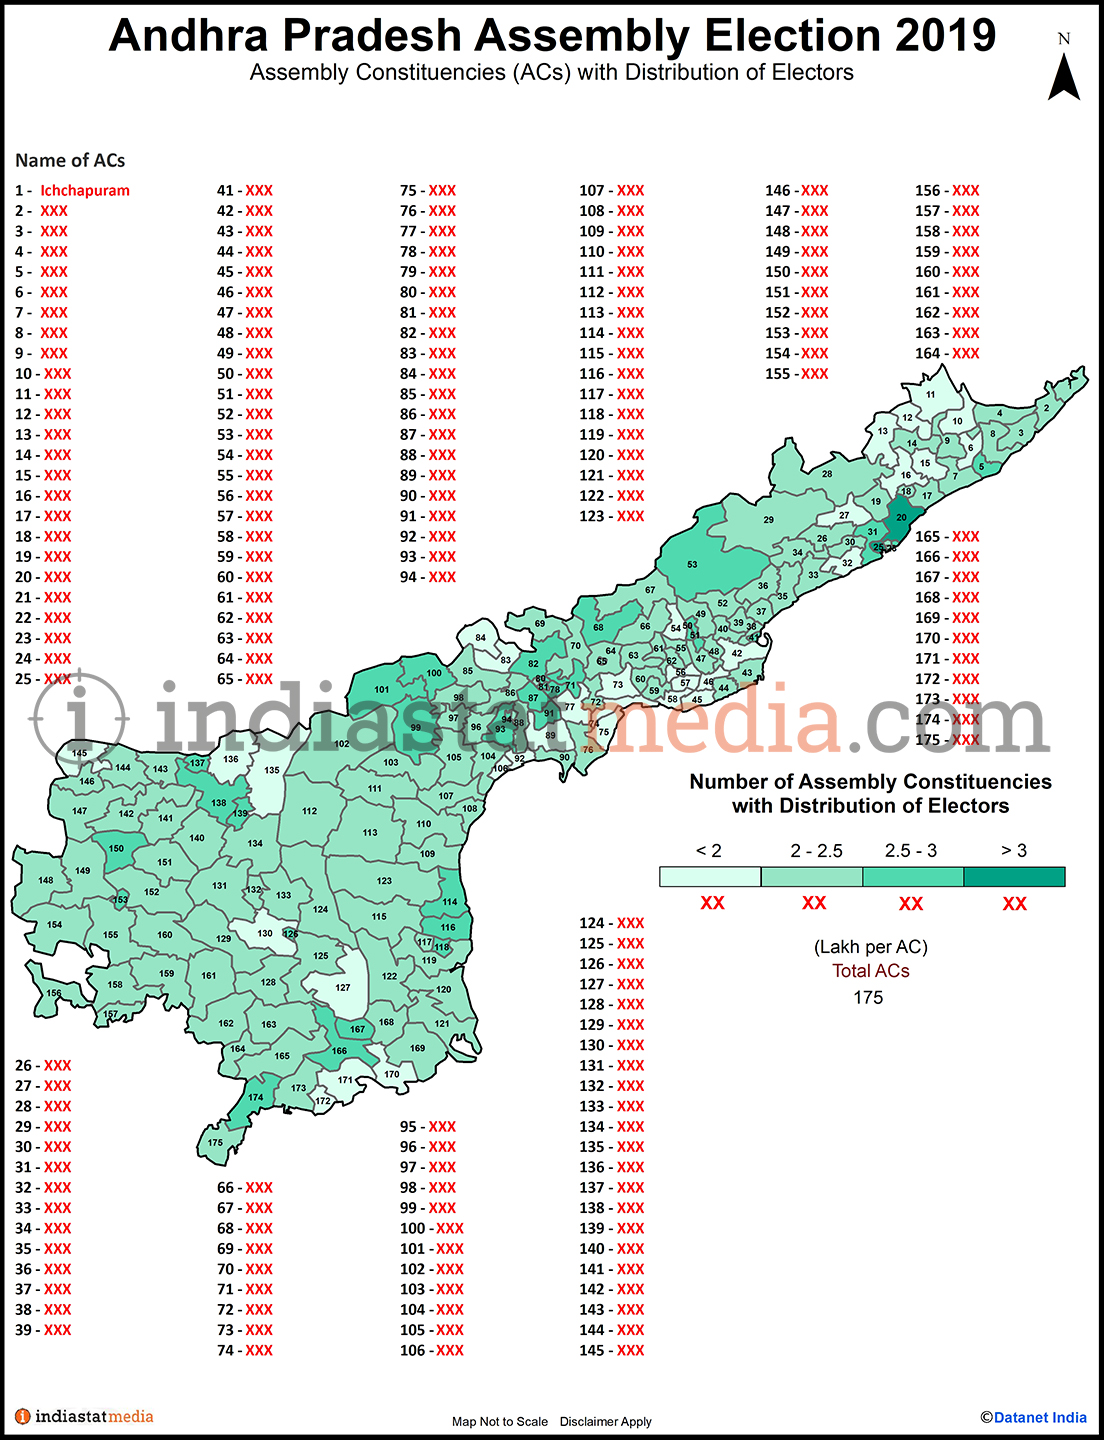 Assembly Constituencies (ACs) with Distribution of Electors in Andhra Pradesh (Assembly Election - 2019)